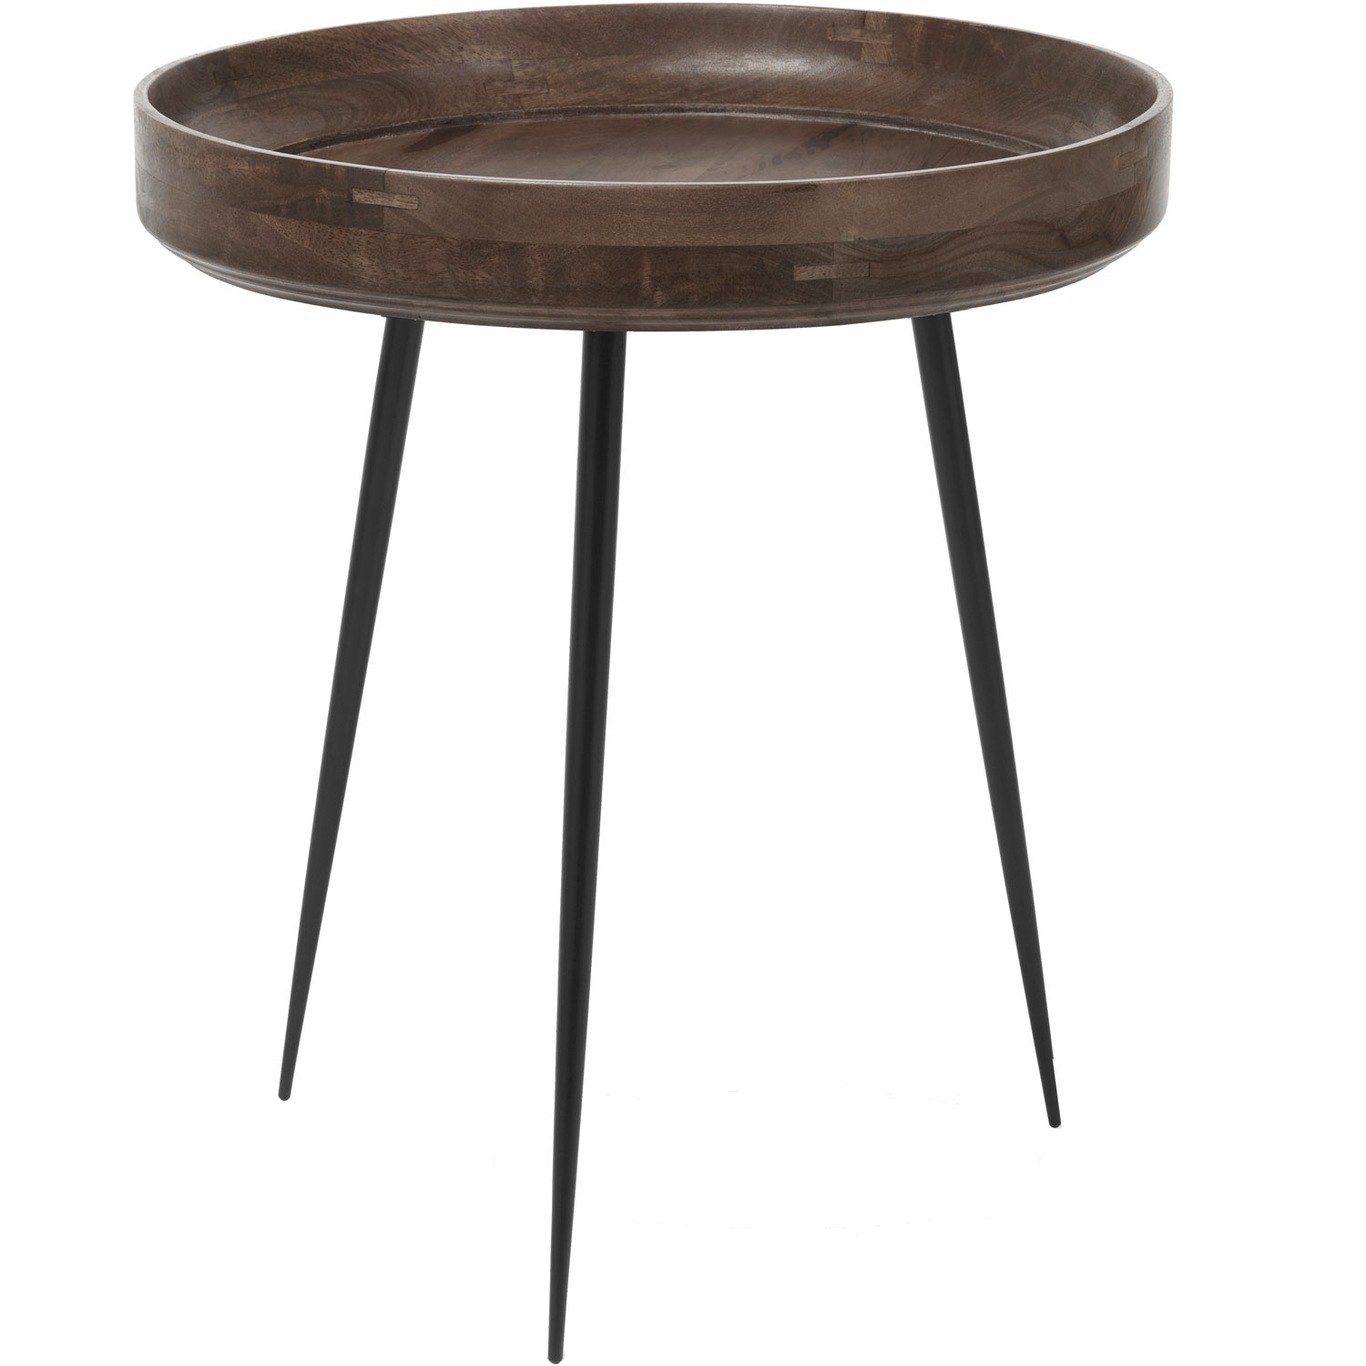 Bowl Coffee Table, Sirka Grey Stained Mango Wood, 46 cm